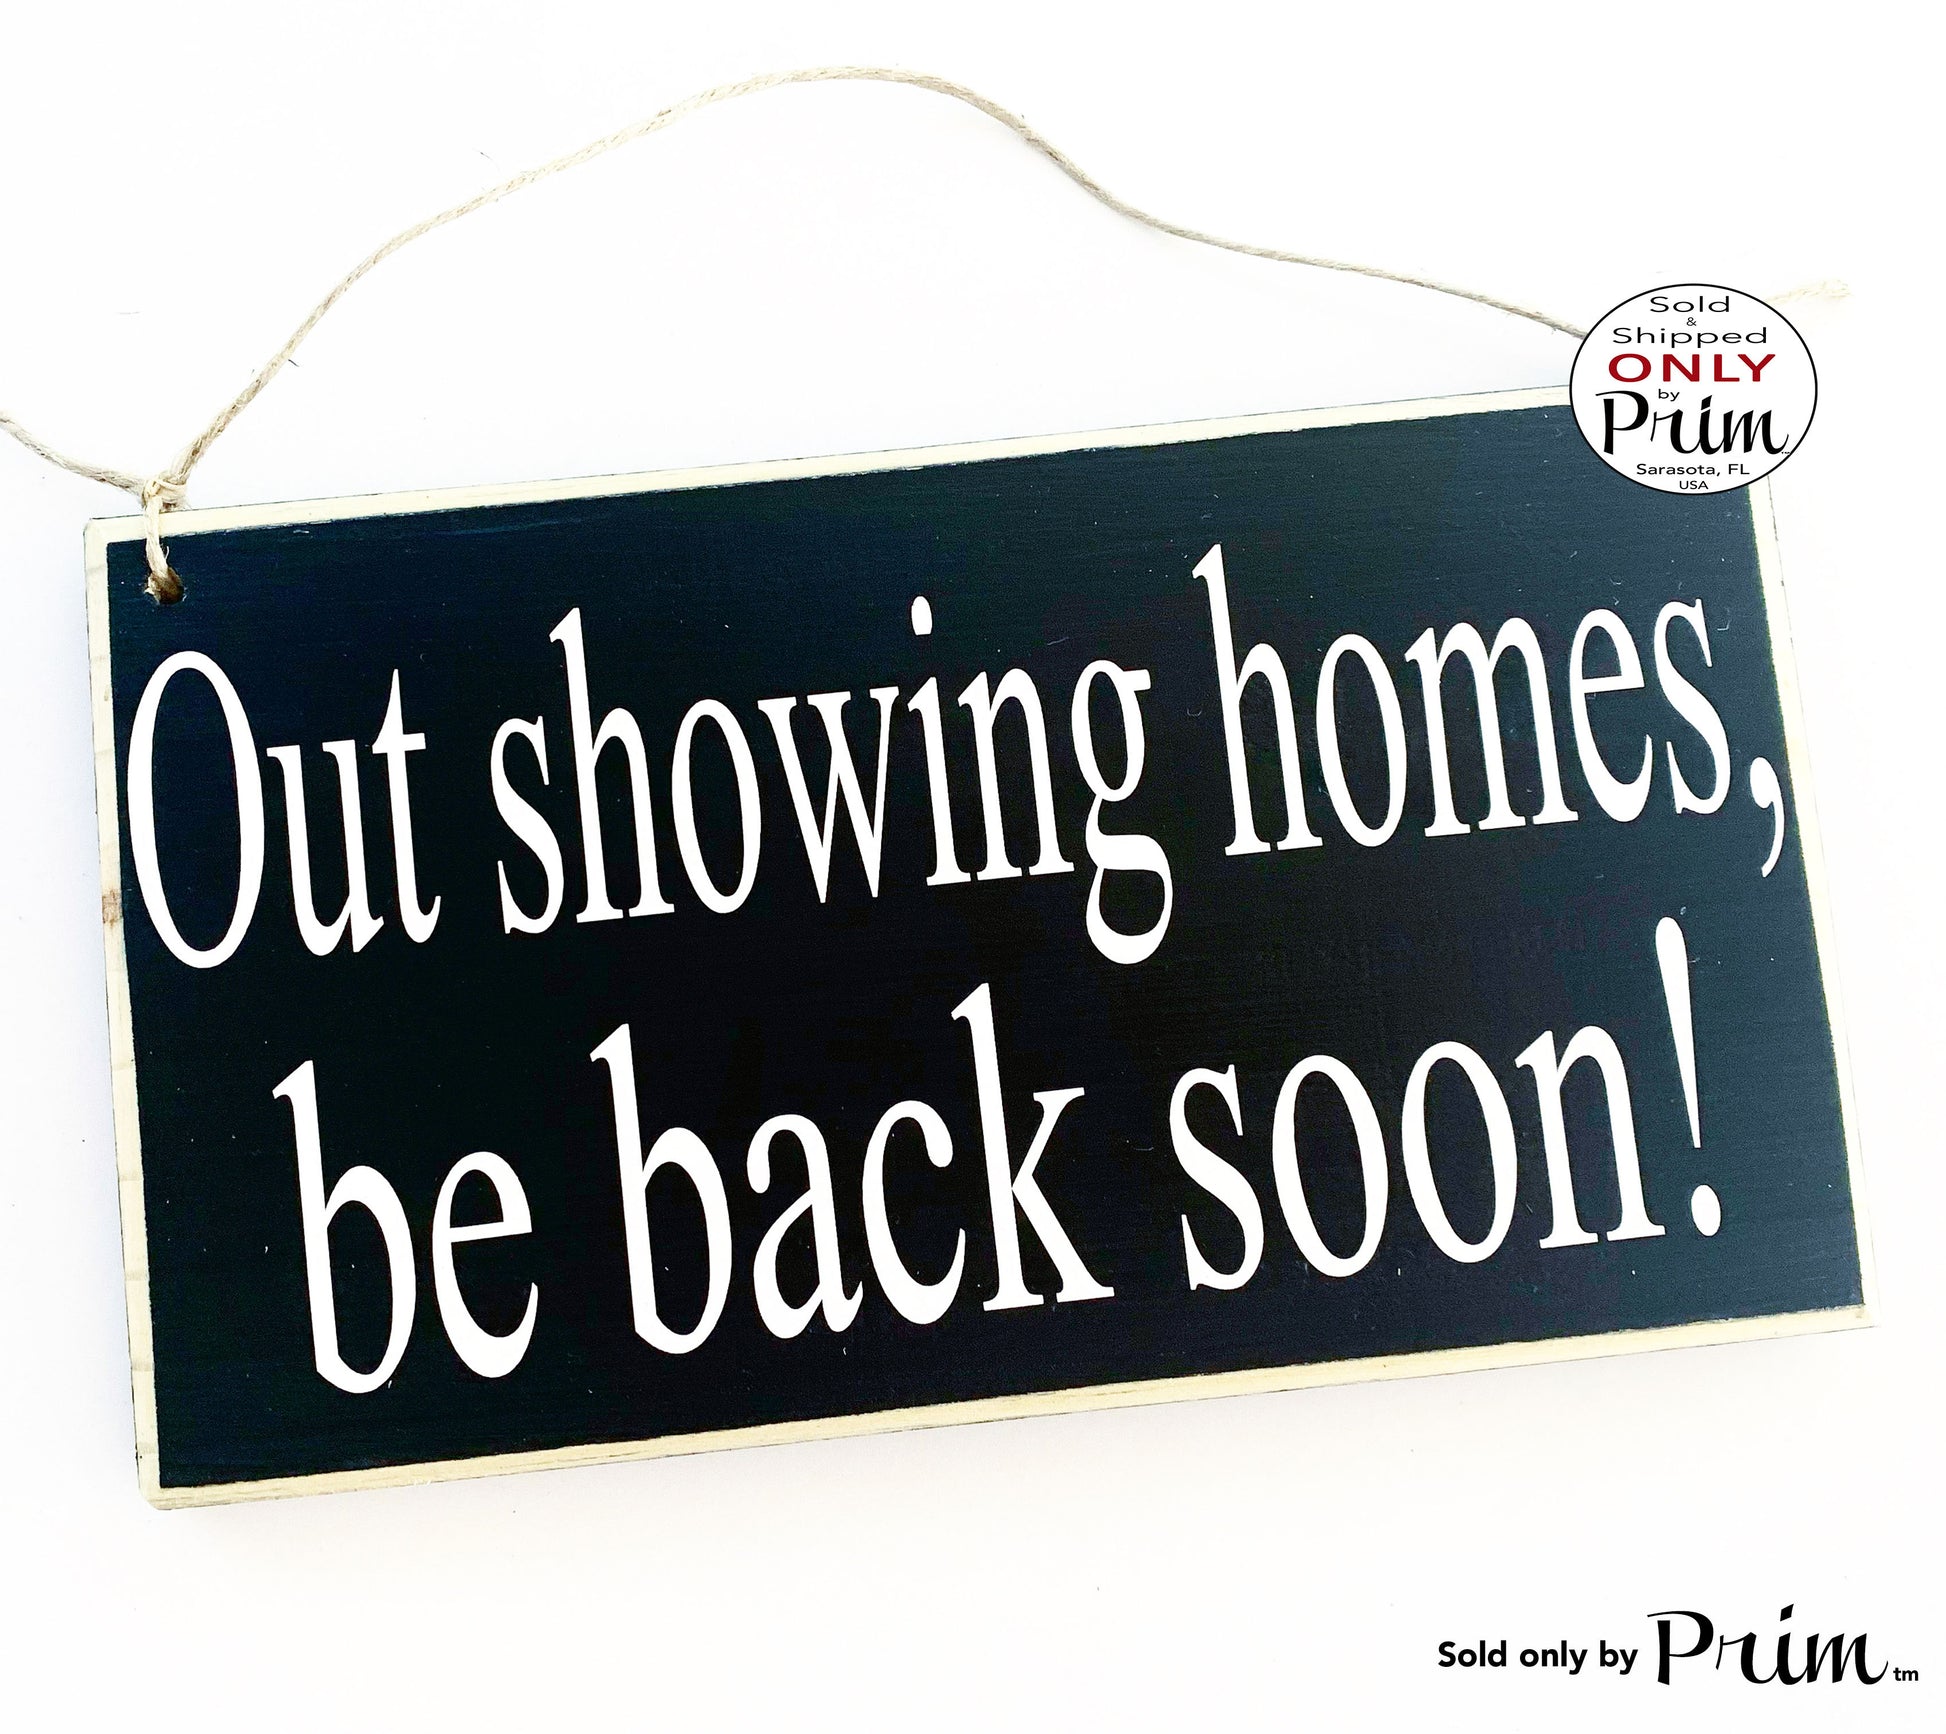 10x6 Out Showing Homes Be Back Soon Custom Wood Sign | Realtor Office Out of the Office Will Be Back Shortly Welcome Door Plaque Designs by Prim